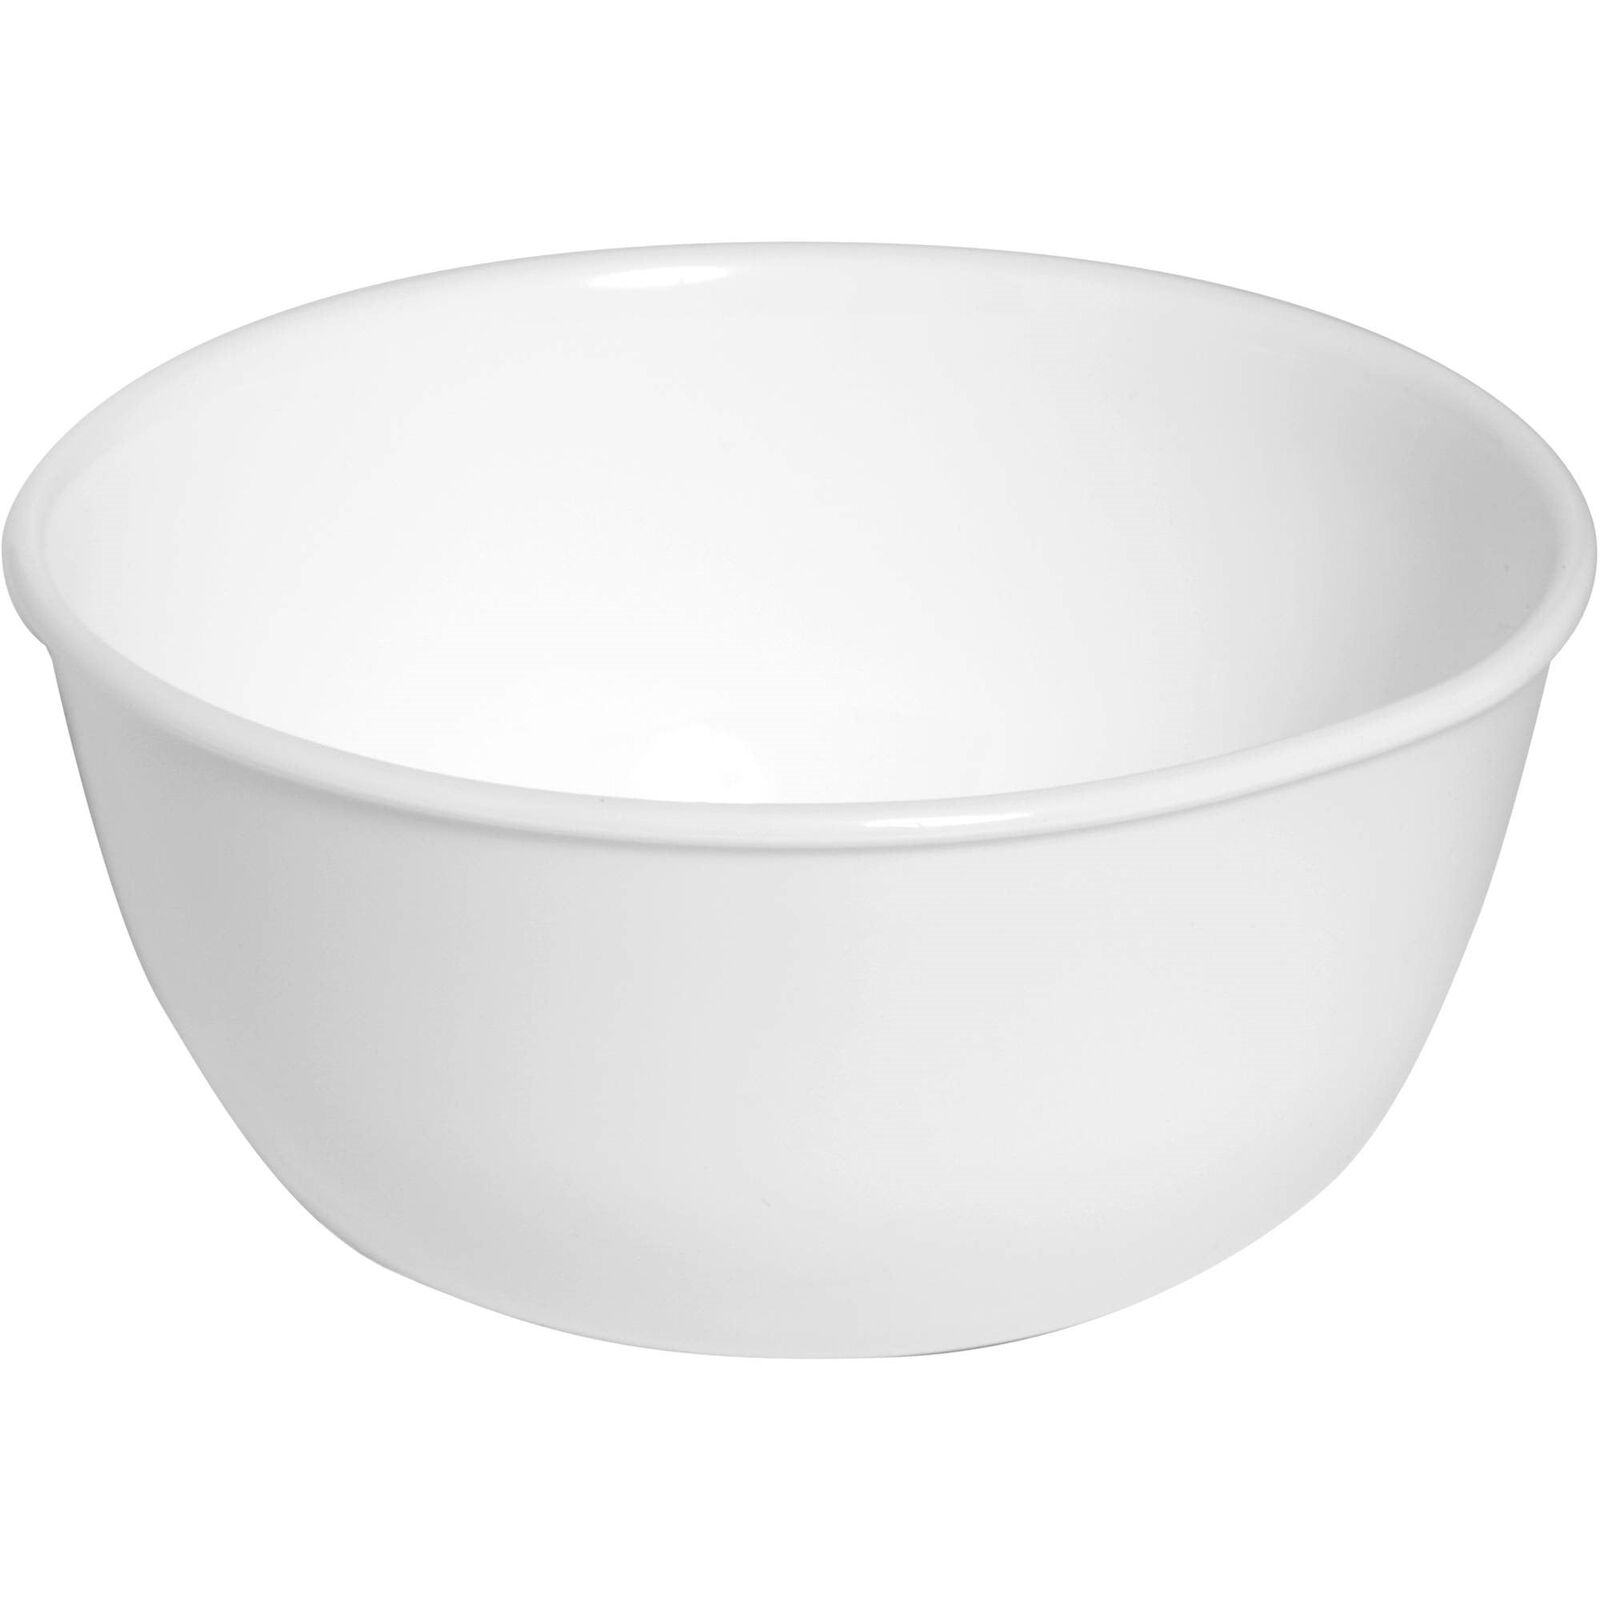 Corelle Winter Frost White, Bowl, 28-Oz, New Deep Chili Soup Cereal Bowl  6.25"